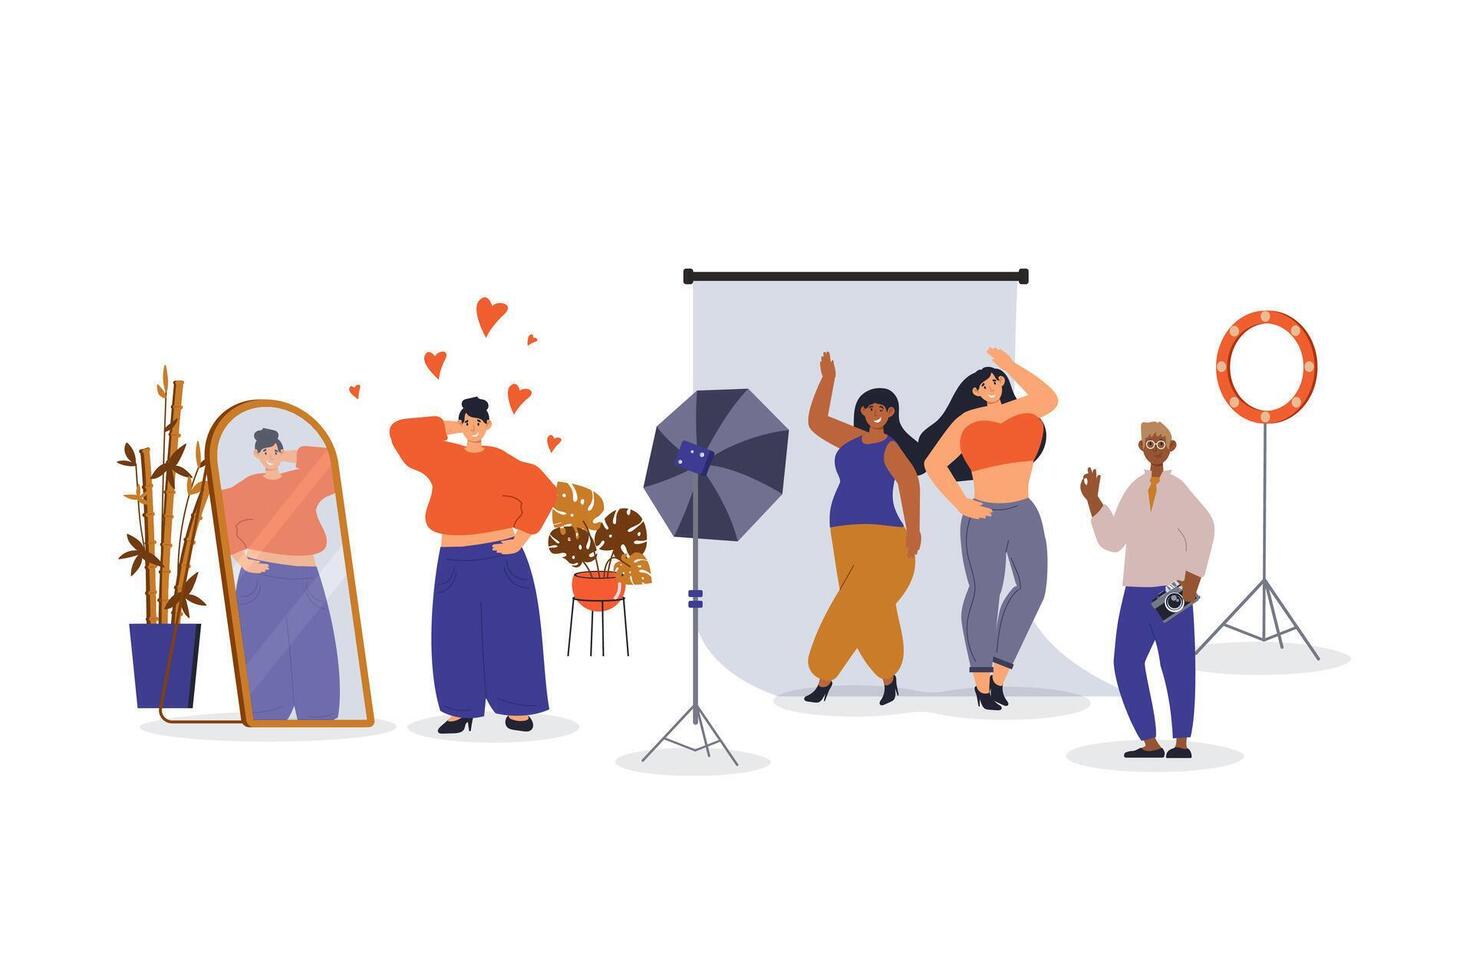 Bodypositive people concept with character scene for web. Women with different body expressing self love by mirror or photoshoots situation in flat design. Vector illustration for marketing material.